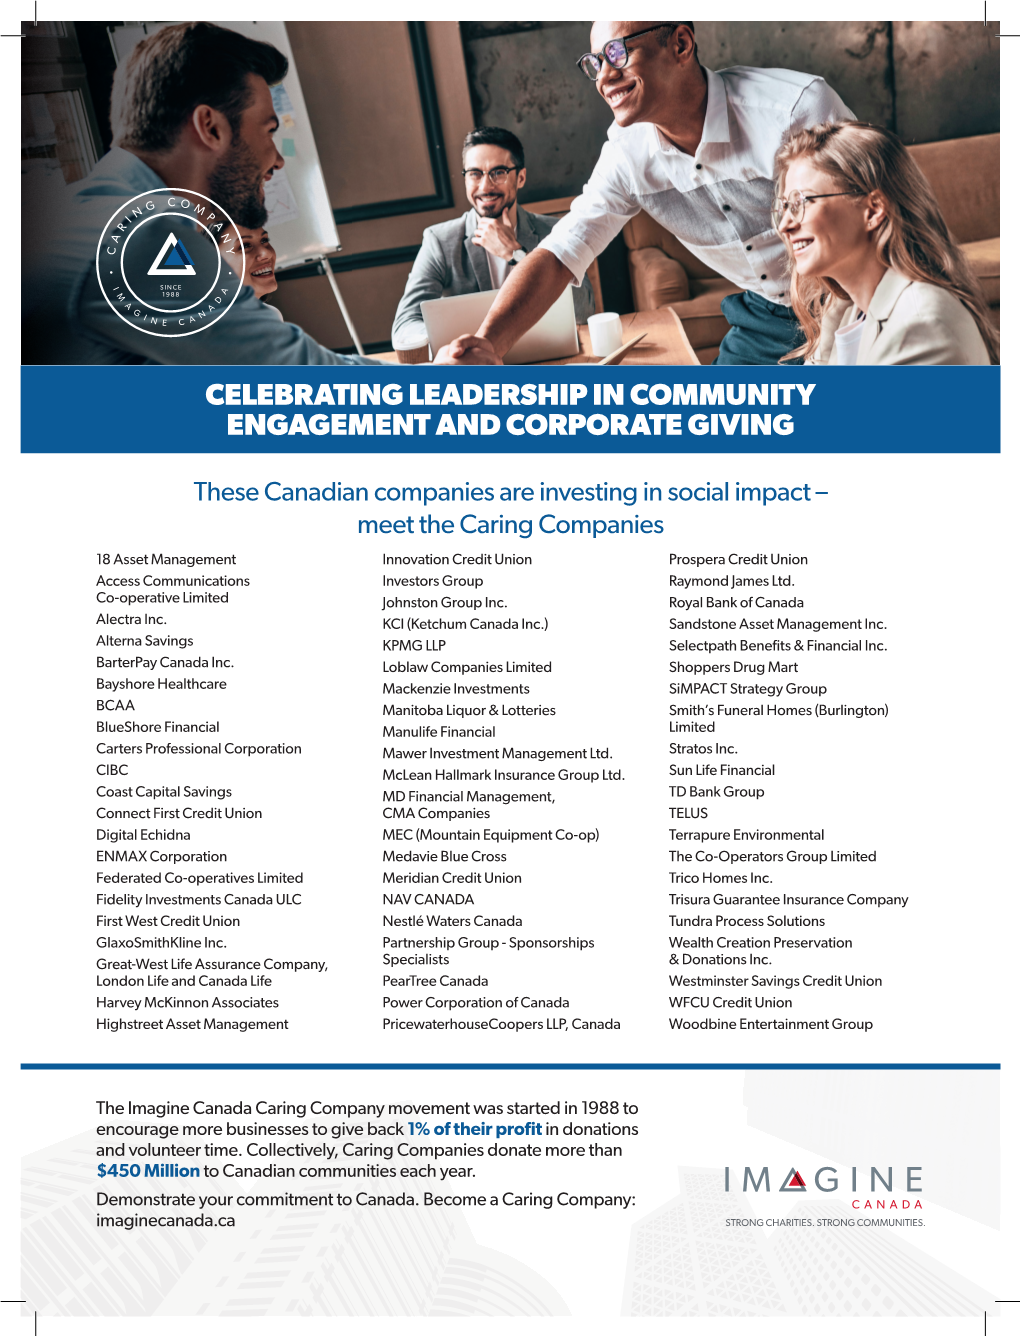 Celebrating Leadership in Community Engagement and Corporate Giving